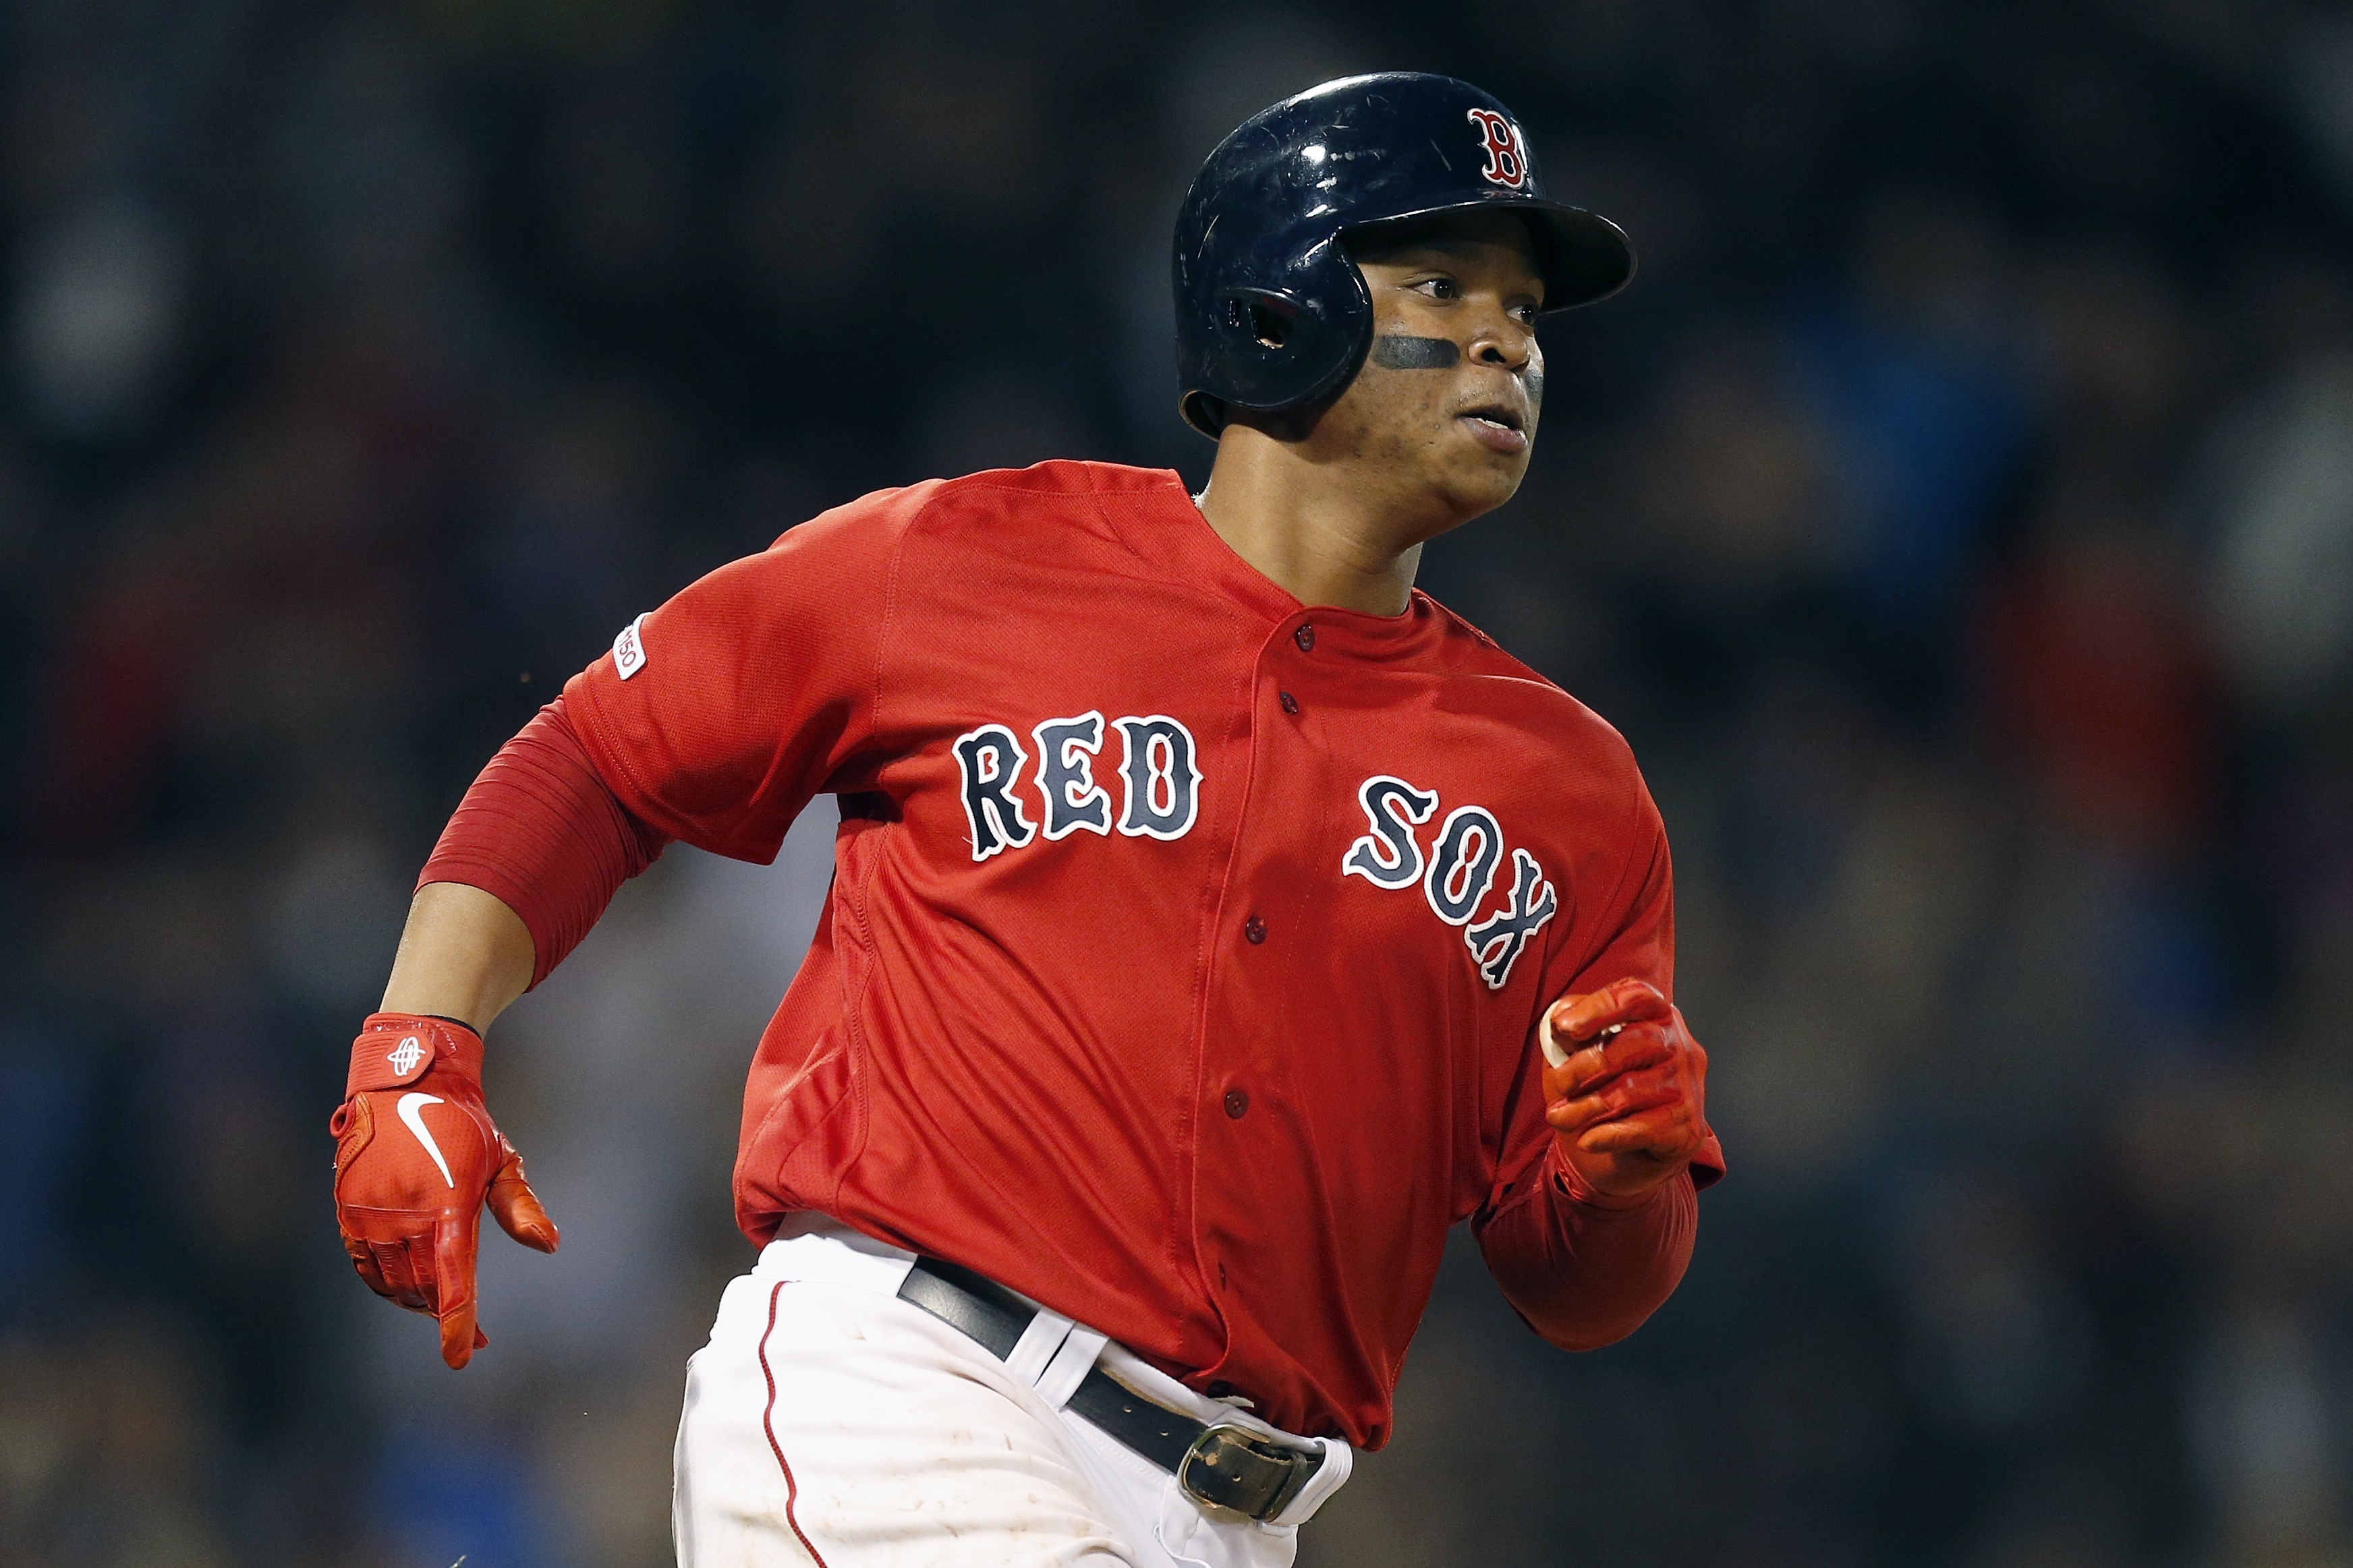 Rafael Devers is one of the HARDEST outs In MLB #rafaeldevers